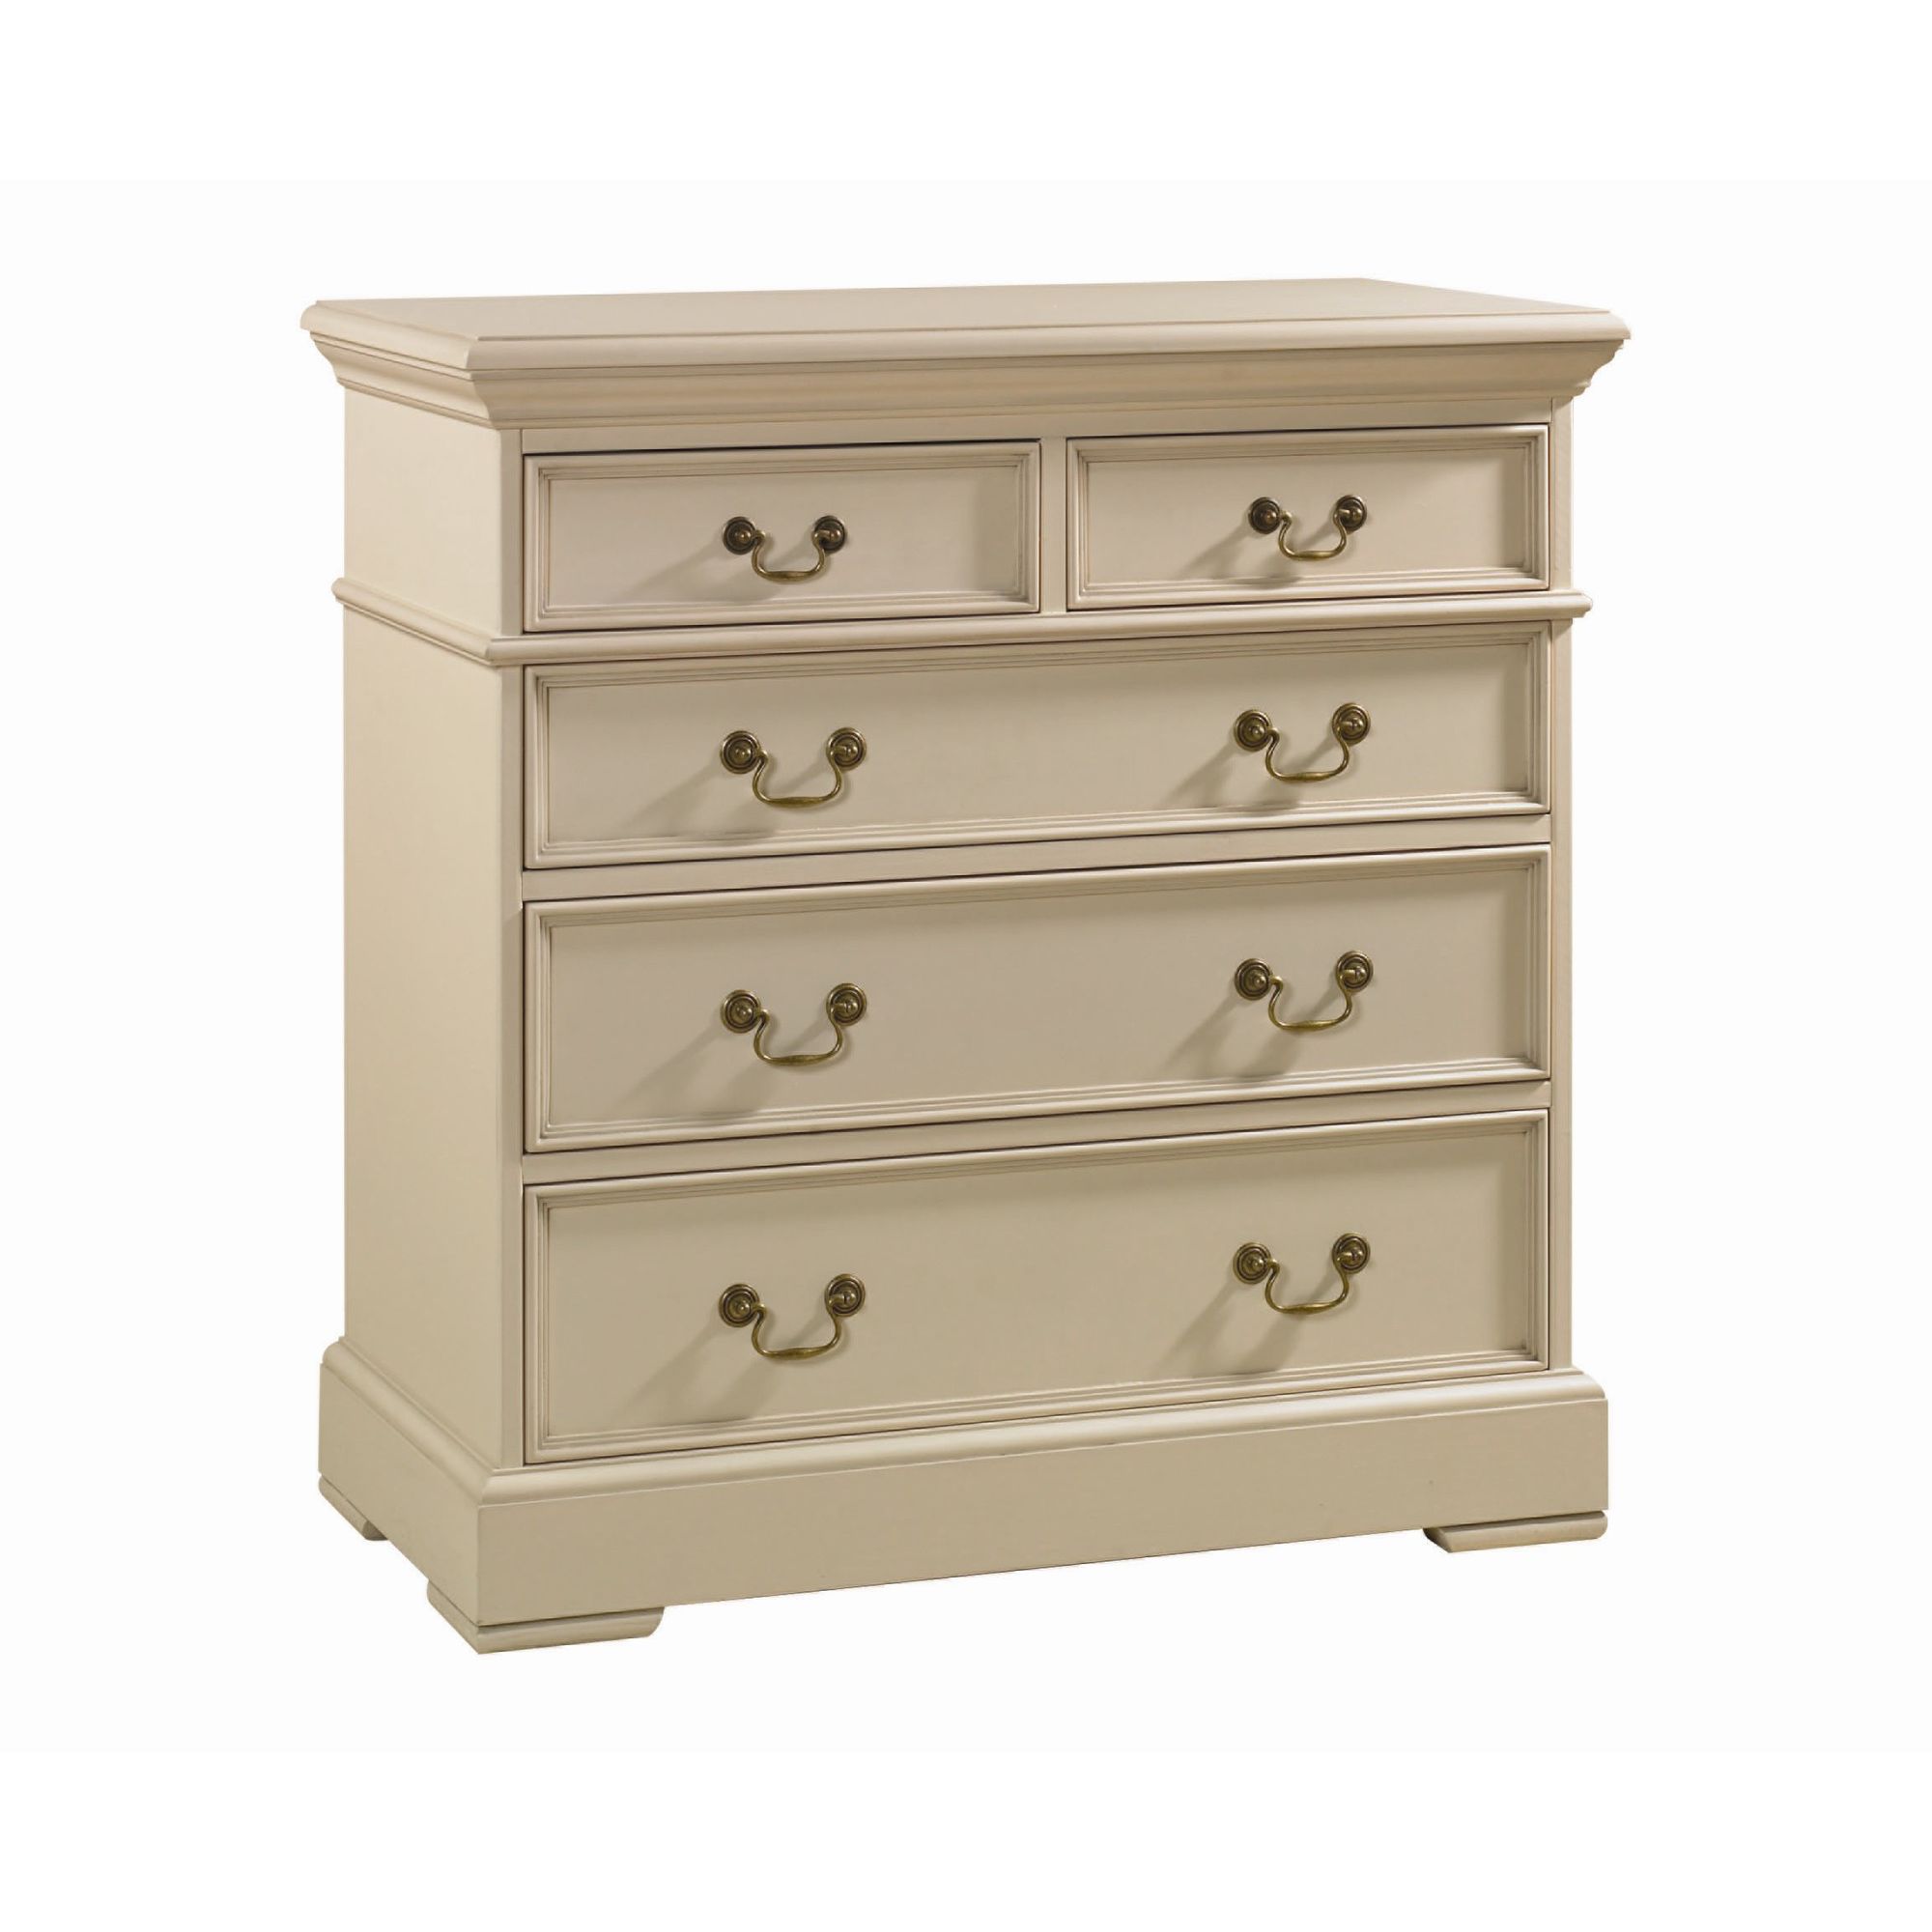 YP Furniture Country House Five Drawer Chest - Ivory at Tesco Direct